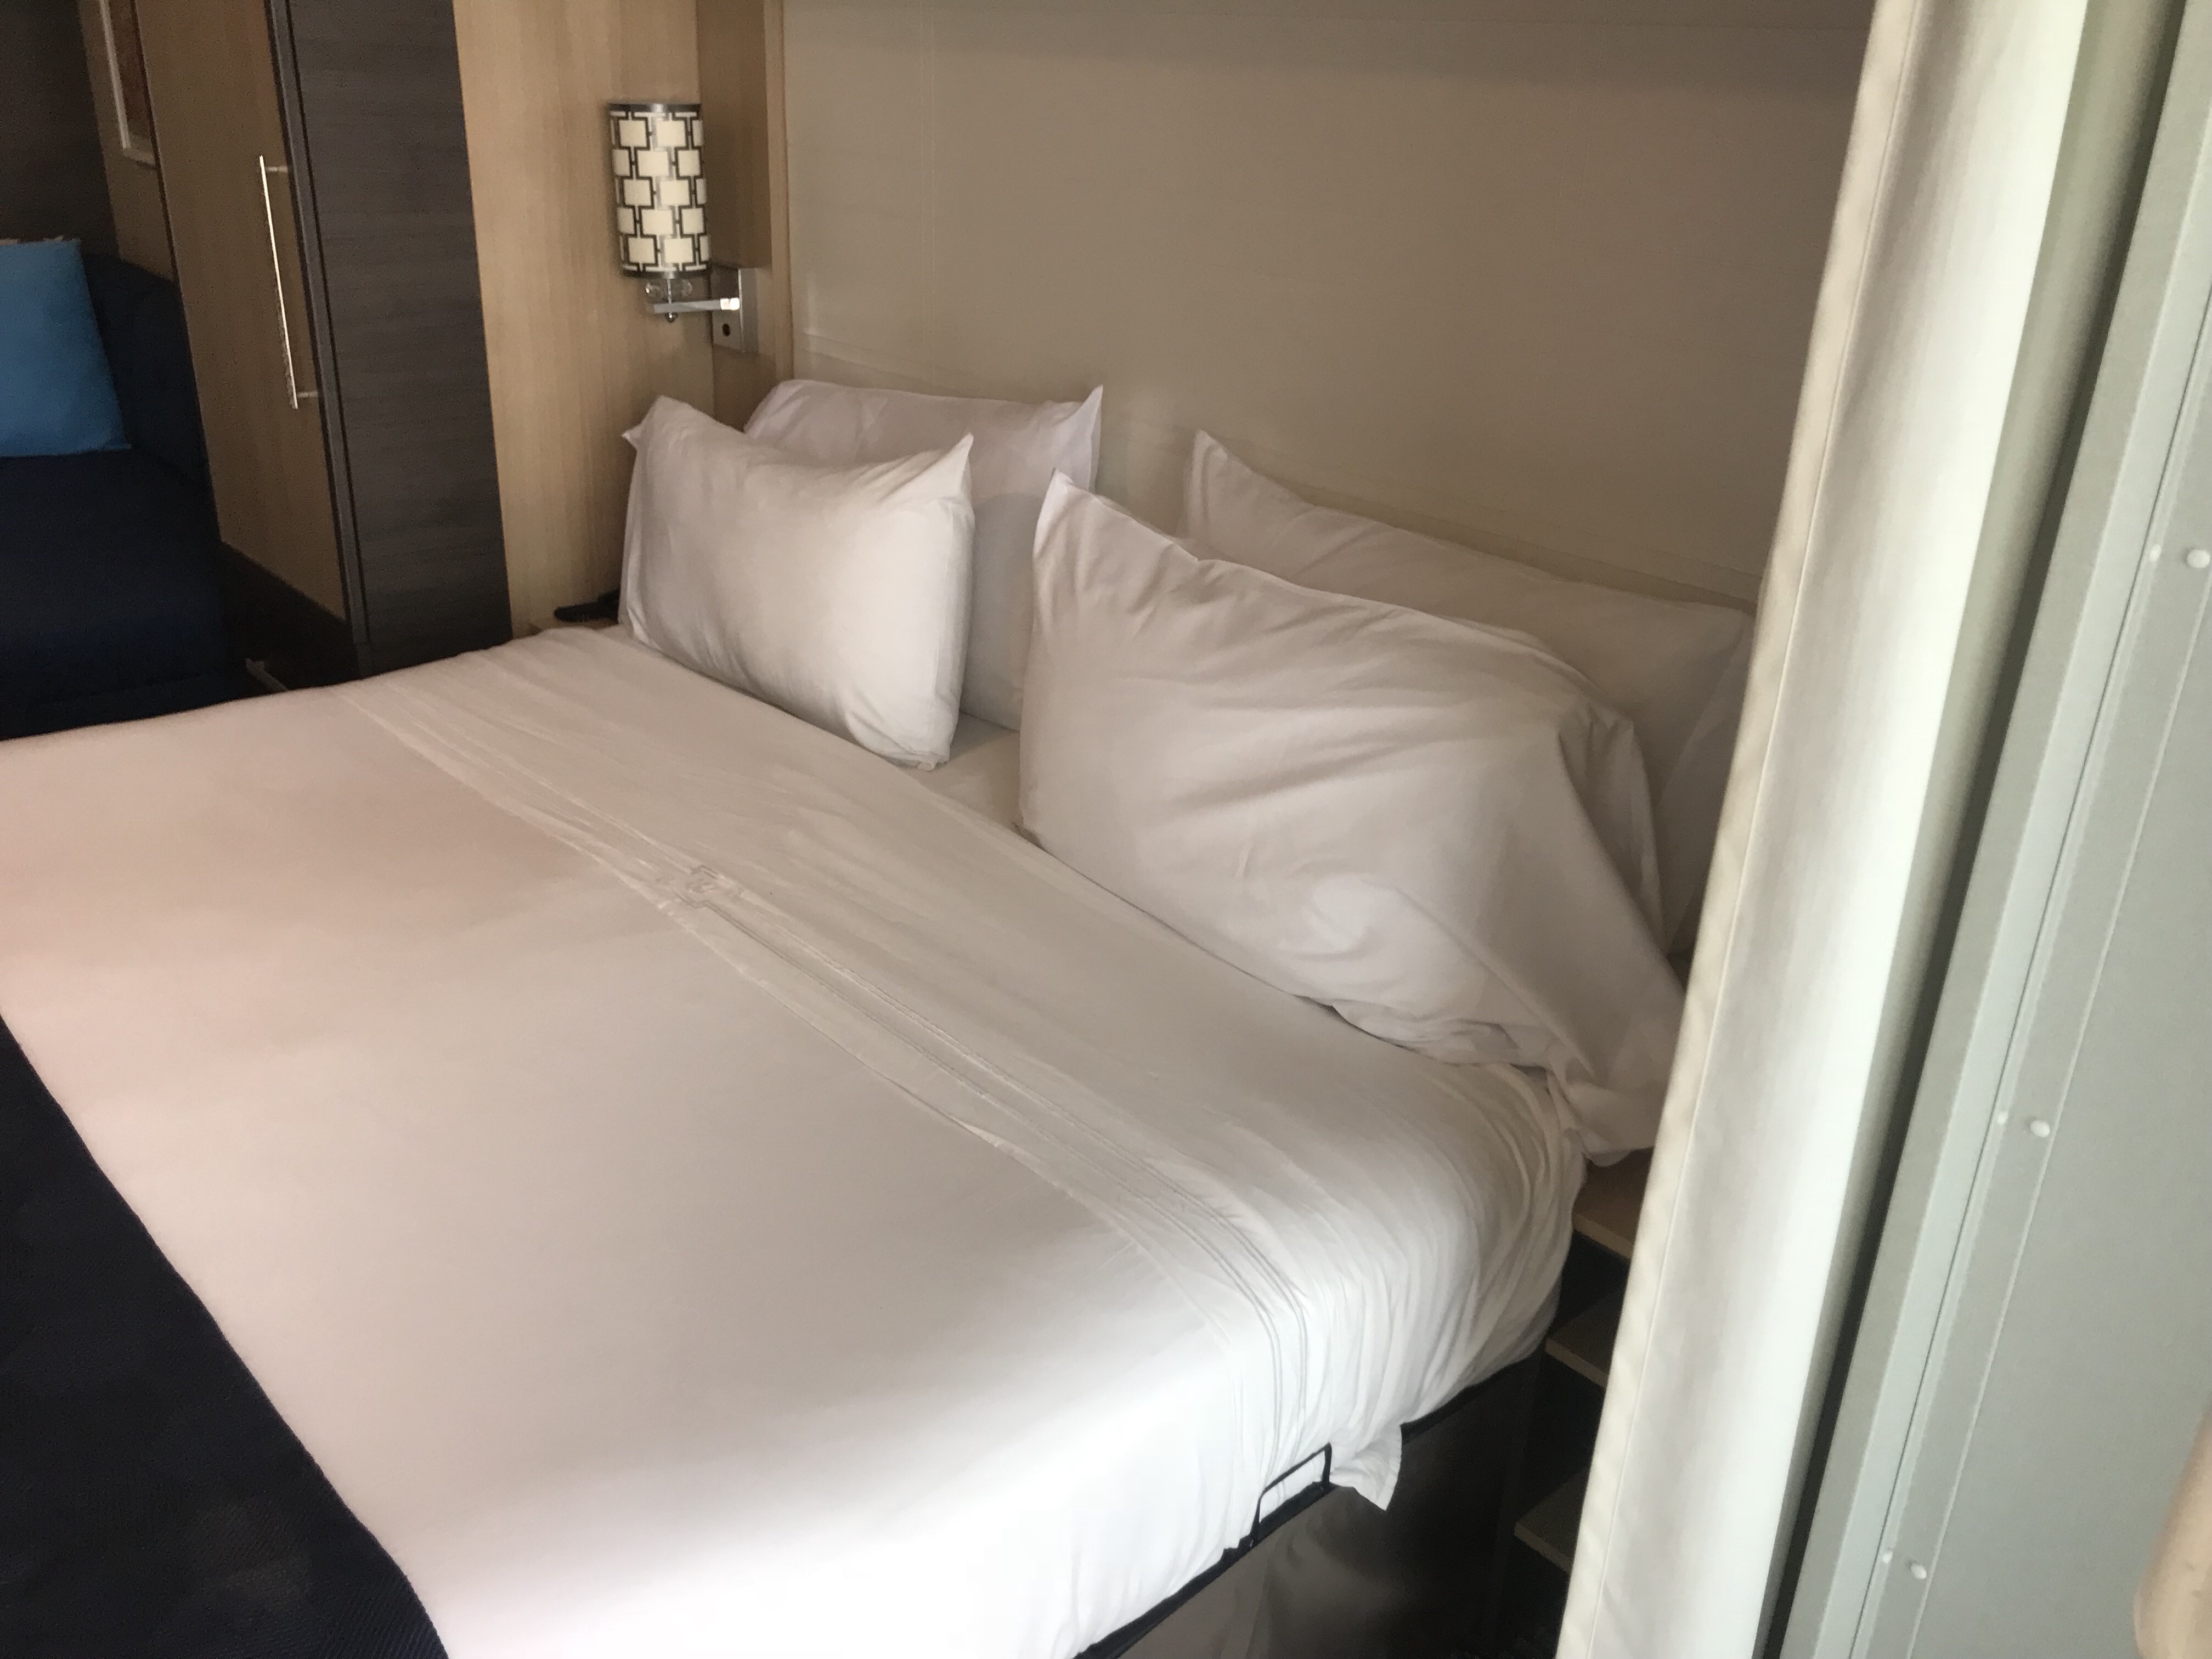 Royal Caribbean Anthem of the Seas Room Review